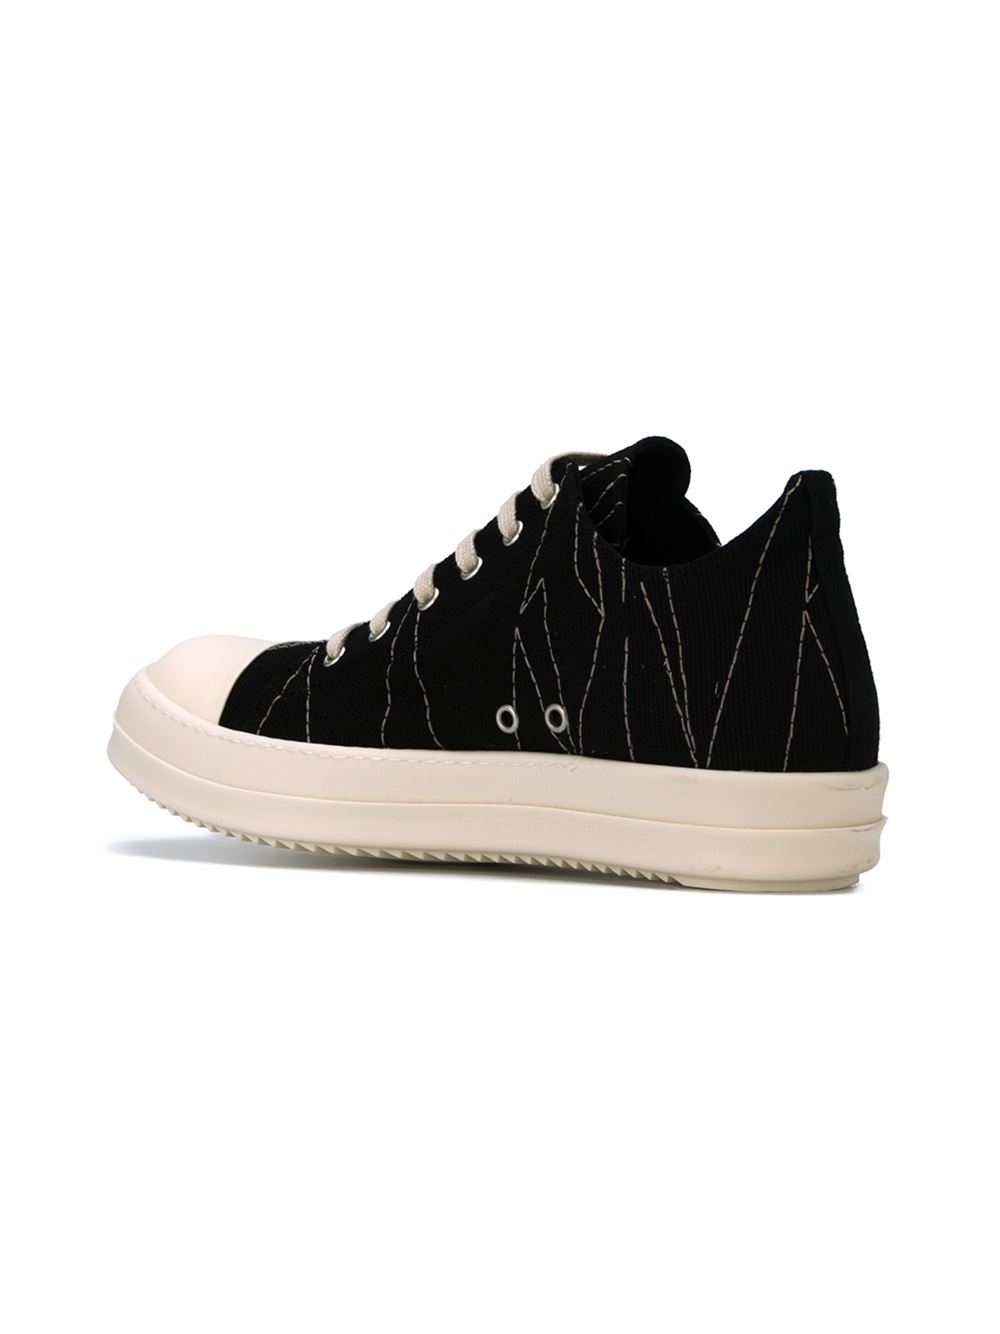 Lyst - Drkshdw By Rick Owens Stitch-Detail Mid-Top Sneakers in Black ...